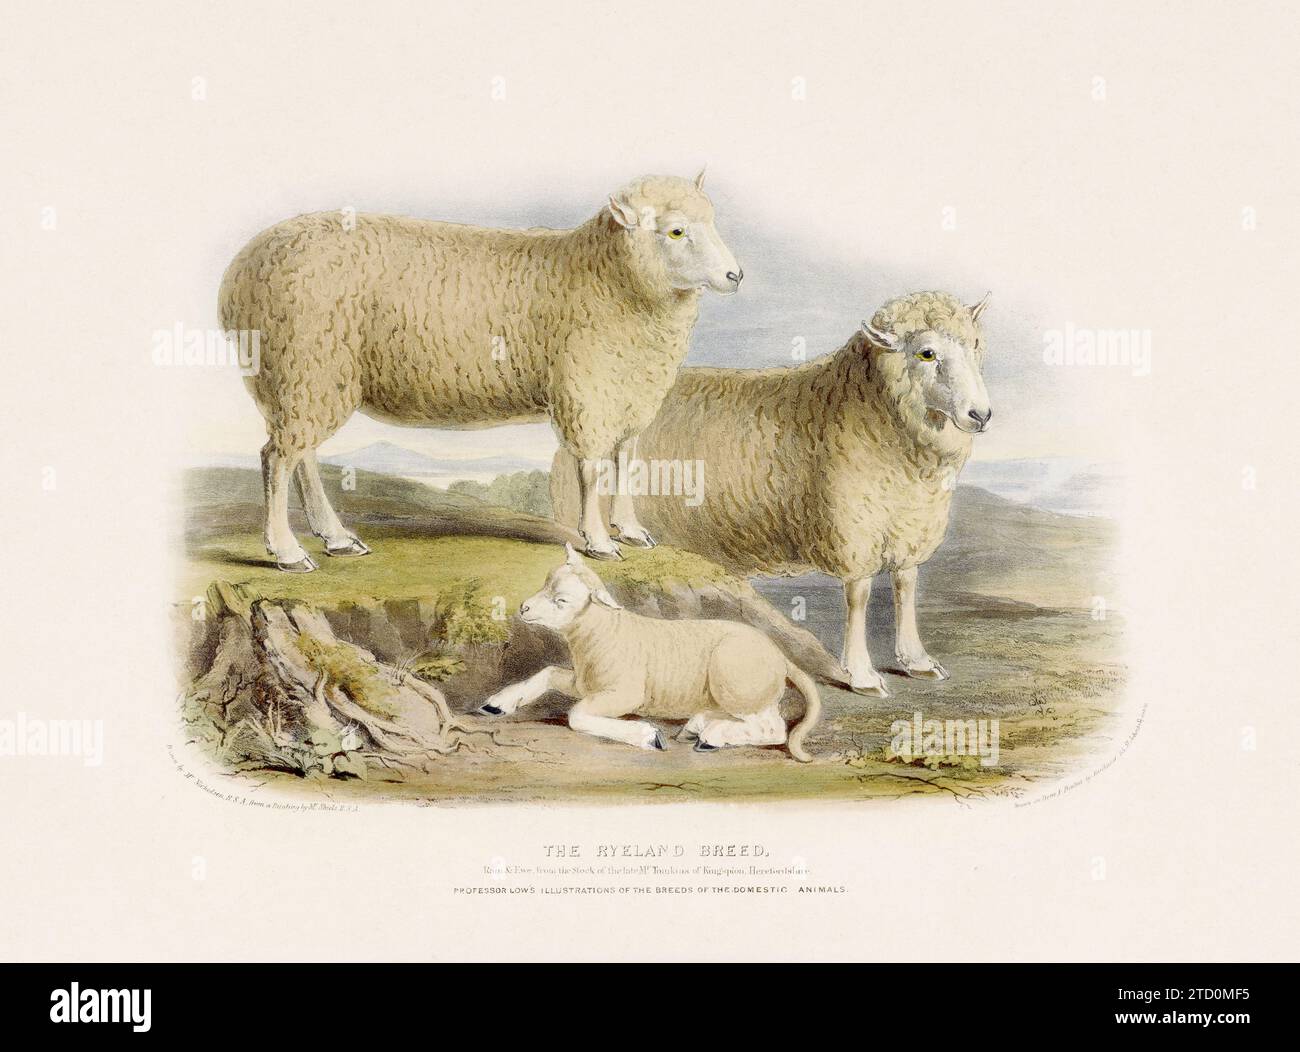 Vintage Sheep illustration from a mid-19th-century book on domestic animal breeds. Stock Photo